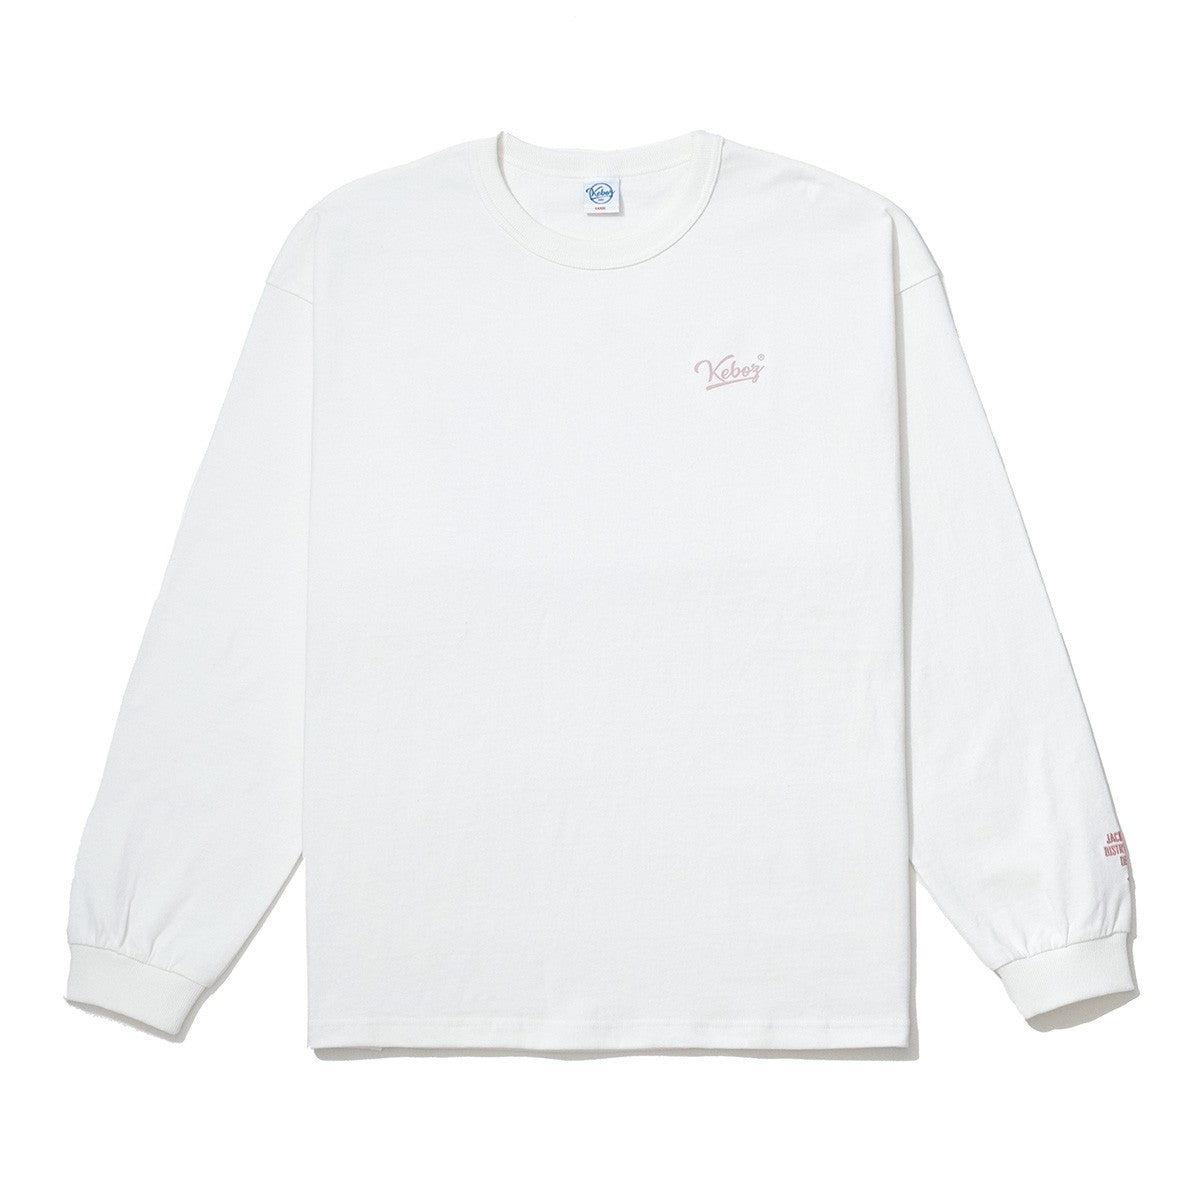 KEBOZ / JACK IN THE BOX 12 YEAR ANNIVERSARY L/S TEE